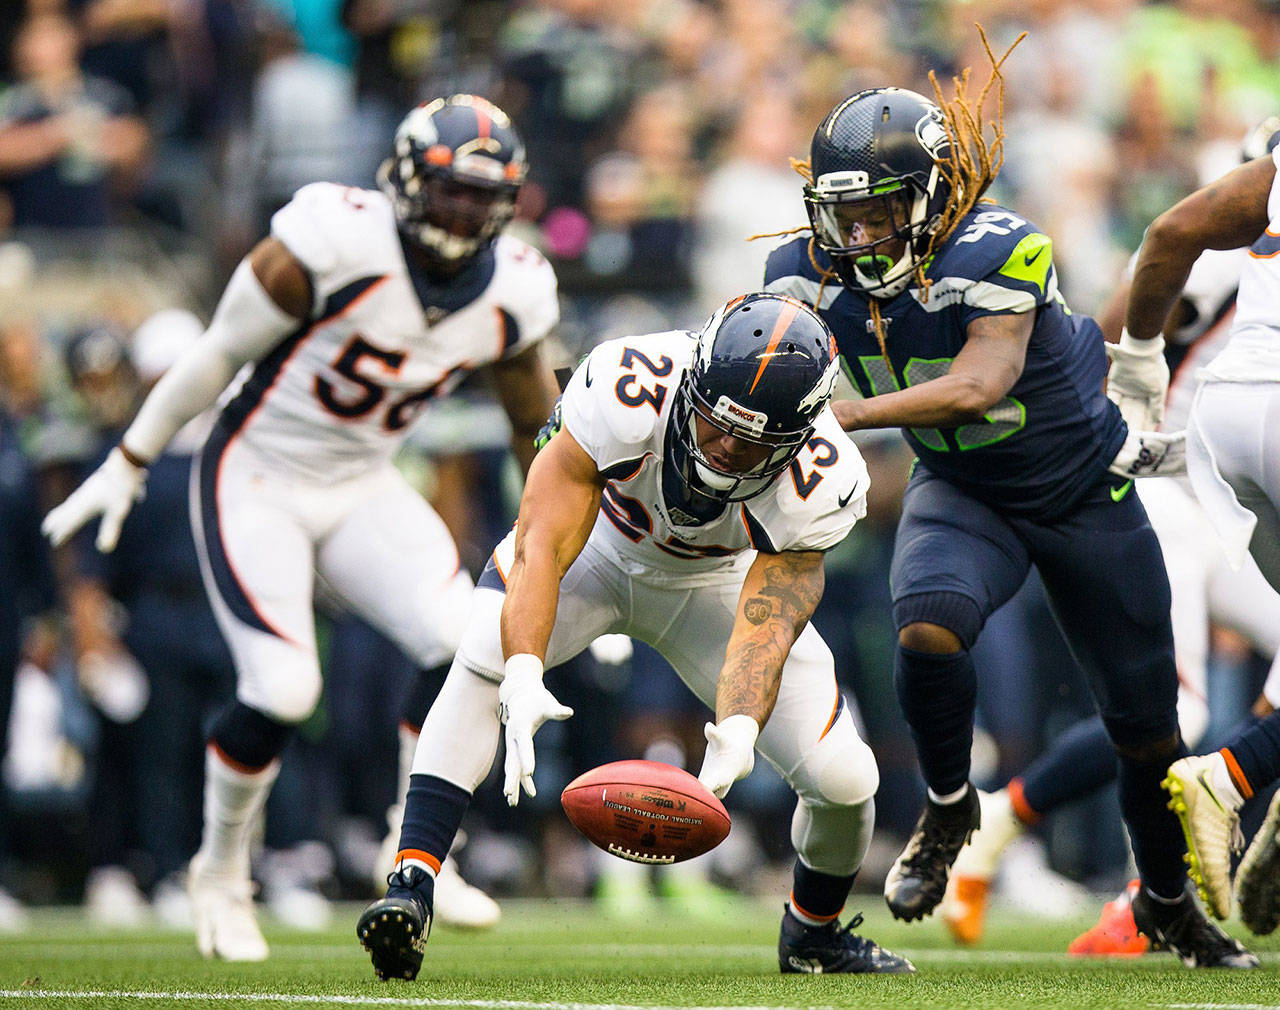 Seattle Seahawks linebacker Shaquem Griffin, right, hits Denver Broncos running back Devontae Booker (23) during a preseason game at Century Link Field in Seattle on Thursday, Aug. 8, 2019. (Rebekah Welch/Seattle Times/TNS)